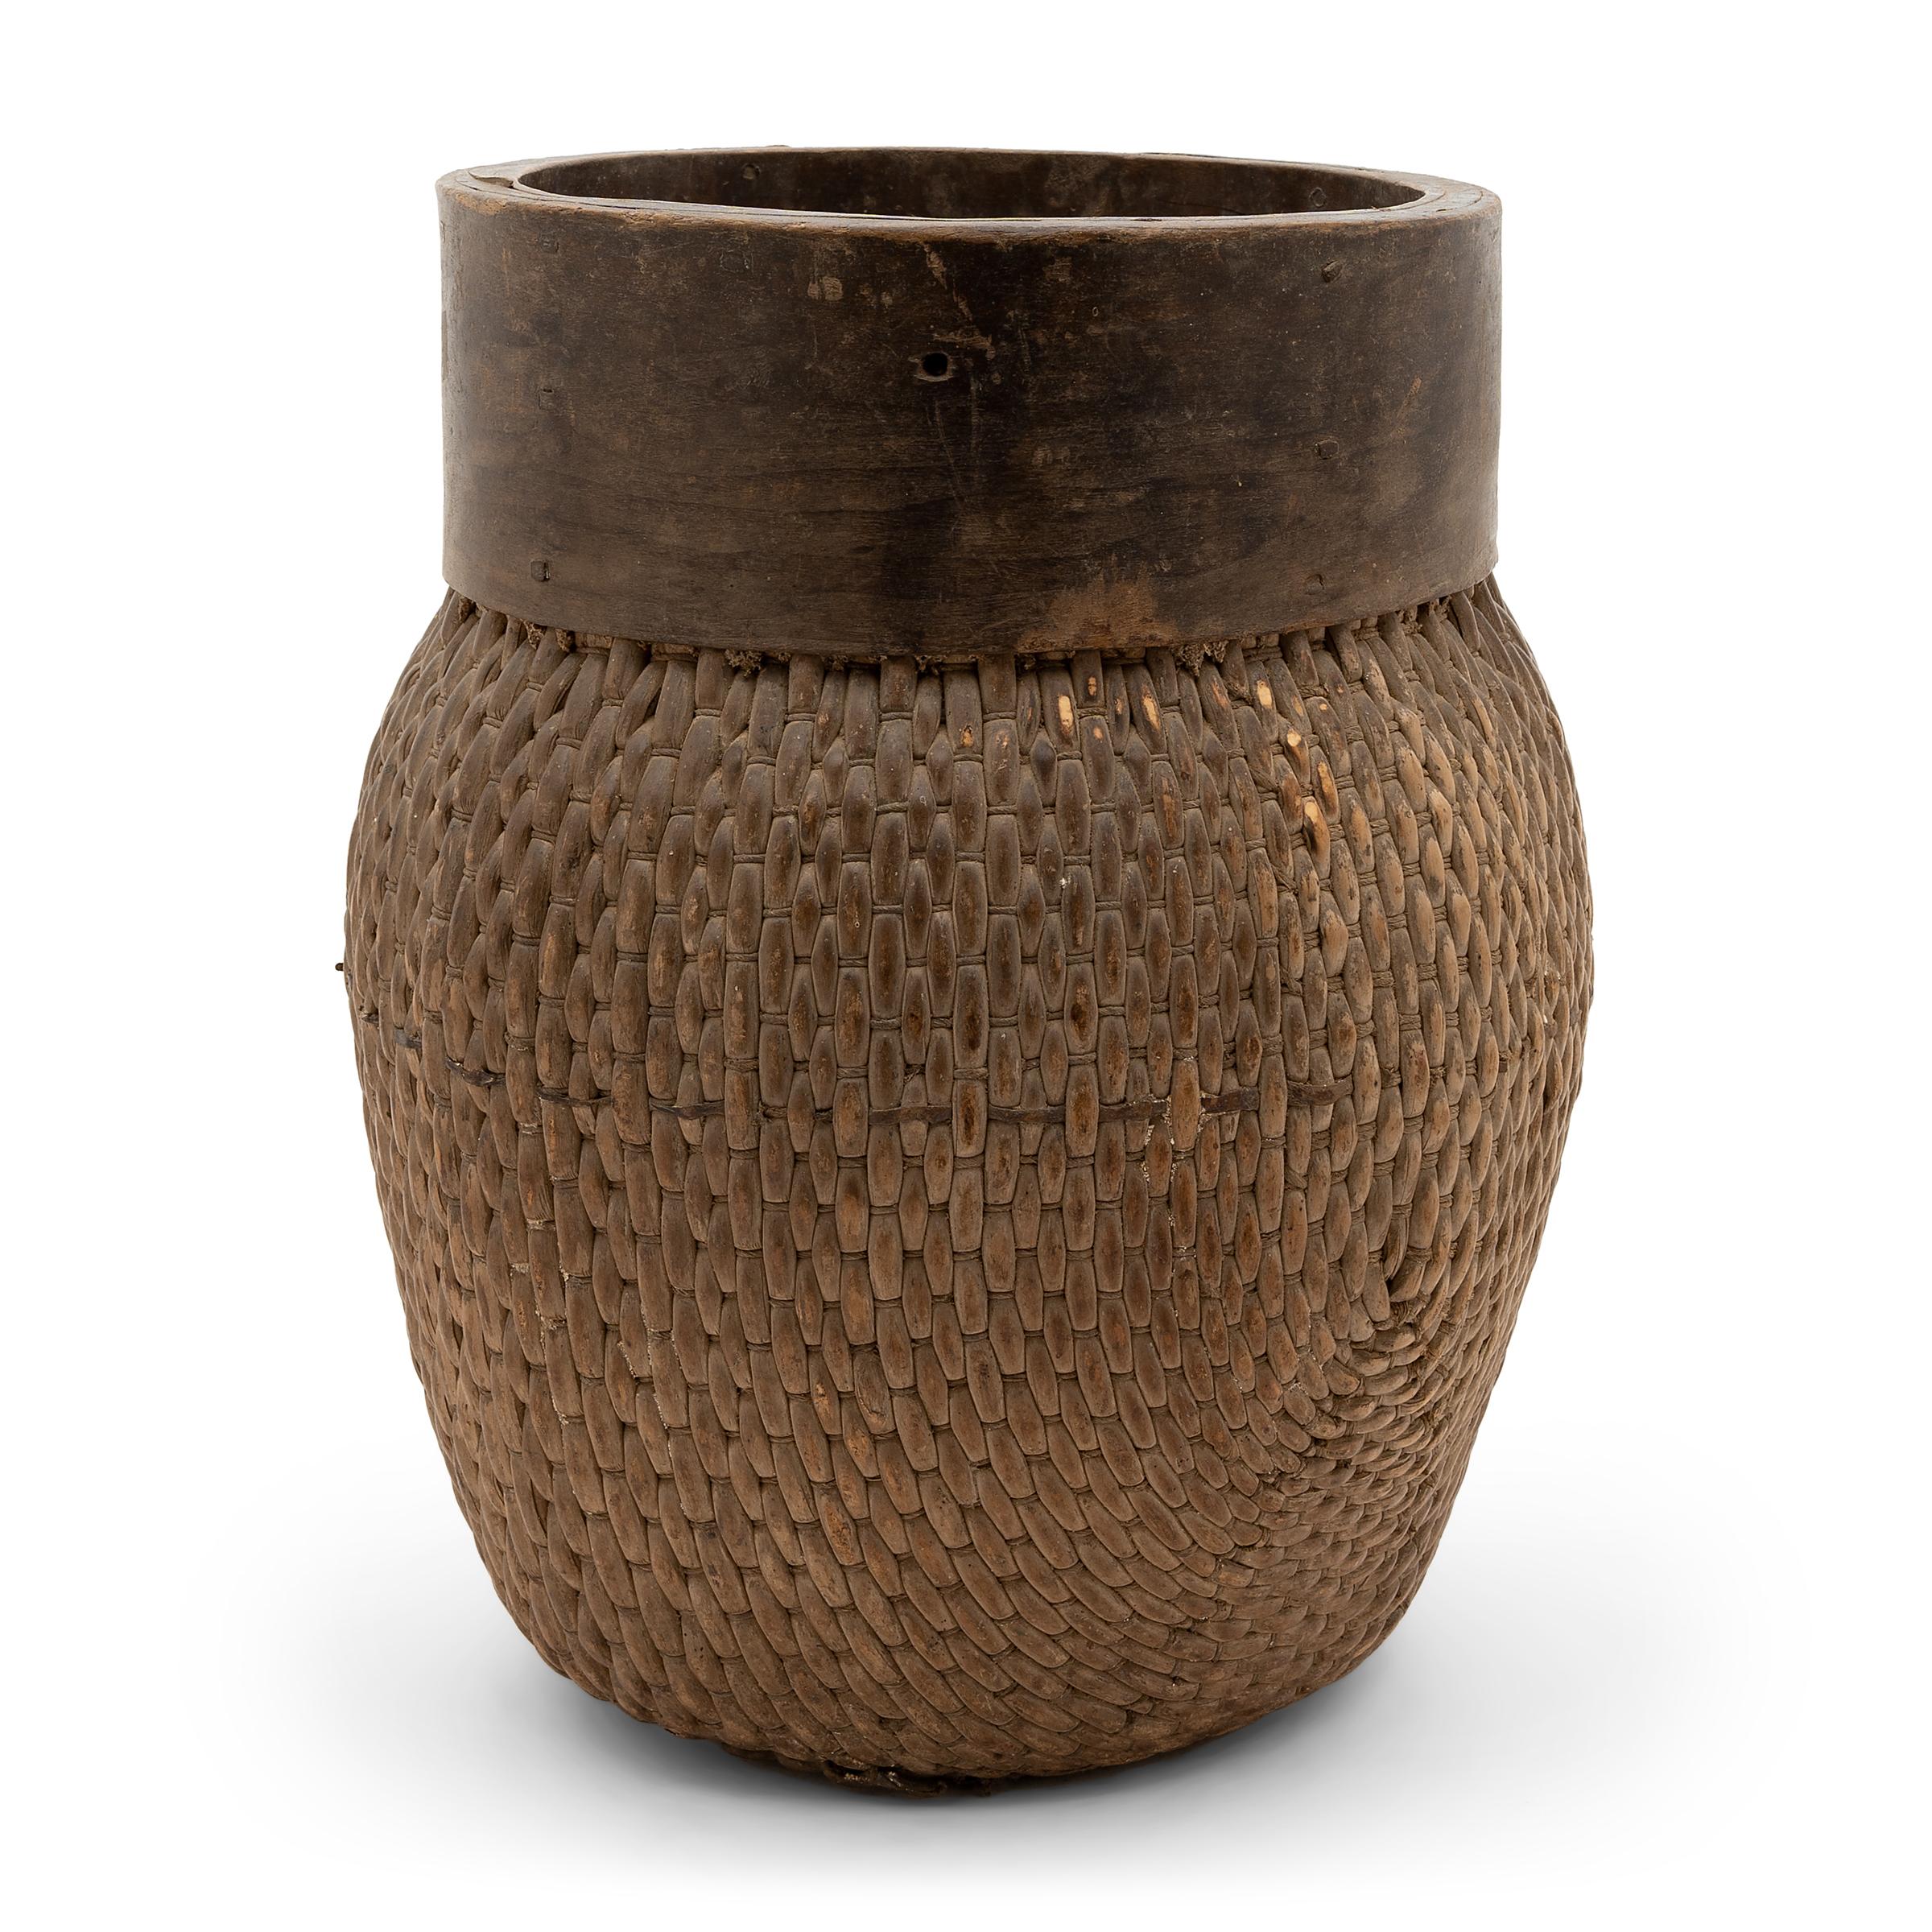 Centuries ago, a woven reed fisherman’s basket such as this would have been common in rural China as an everyday item, used until it became worn through. This particular example remains in beautiful condition with a dark brown color and slightly